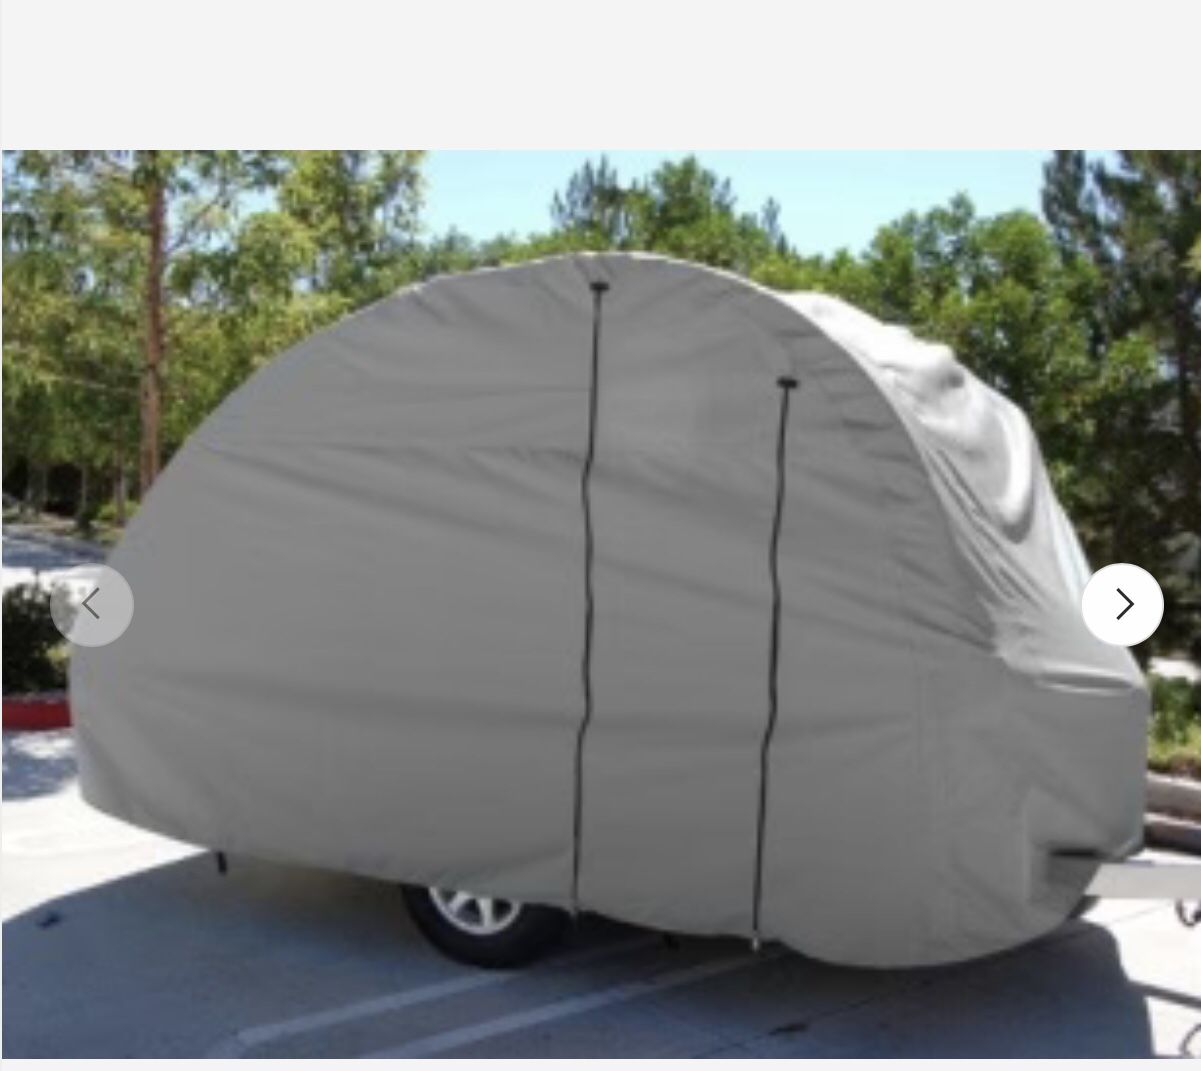 Cover For Little Guy Mini Max RV ….over $500.00  Now $250